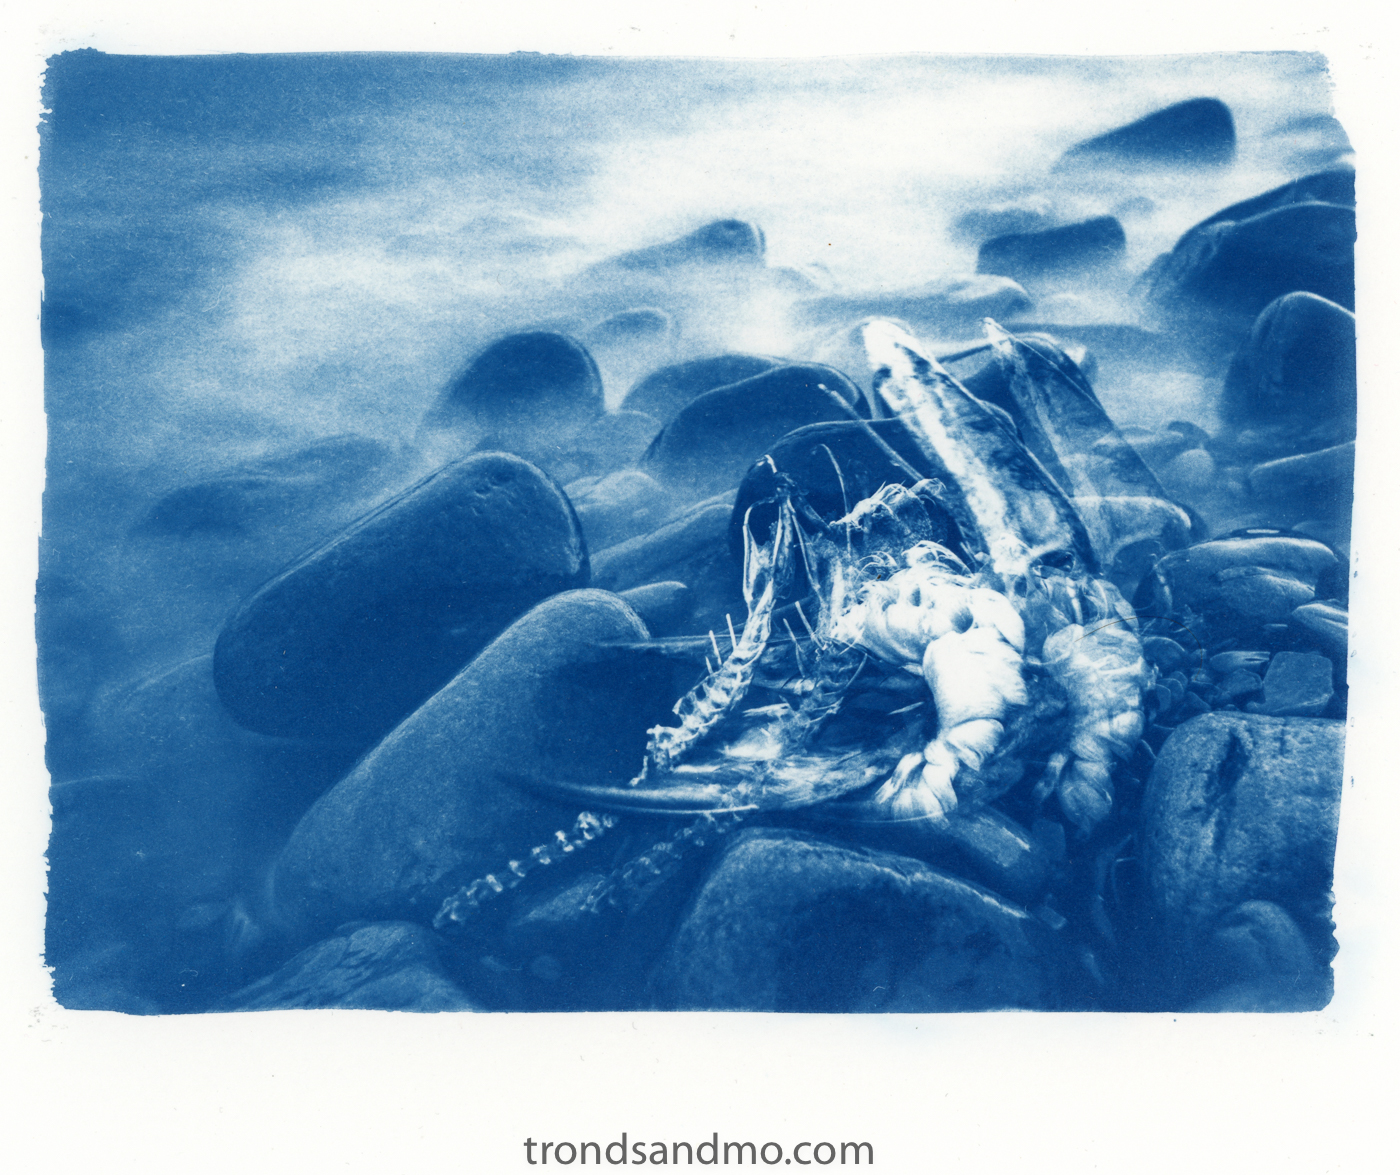 Dreamland - 8x10 Cyanotype on Watercolor Paper Limited Edition of 10 —  julius schlosburg